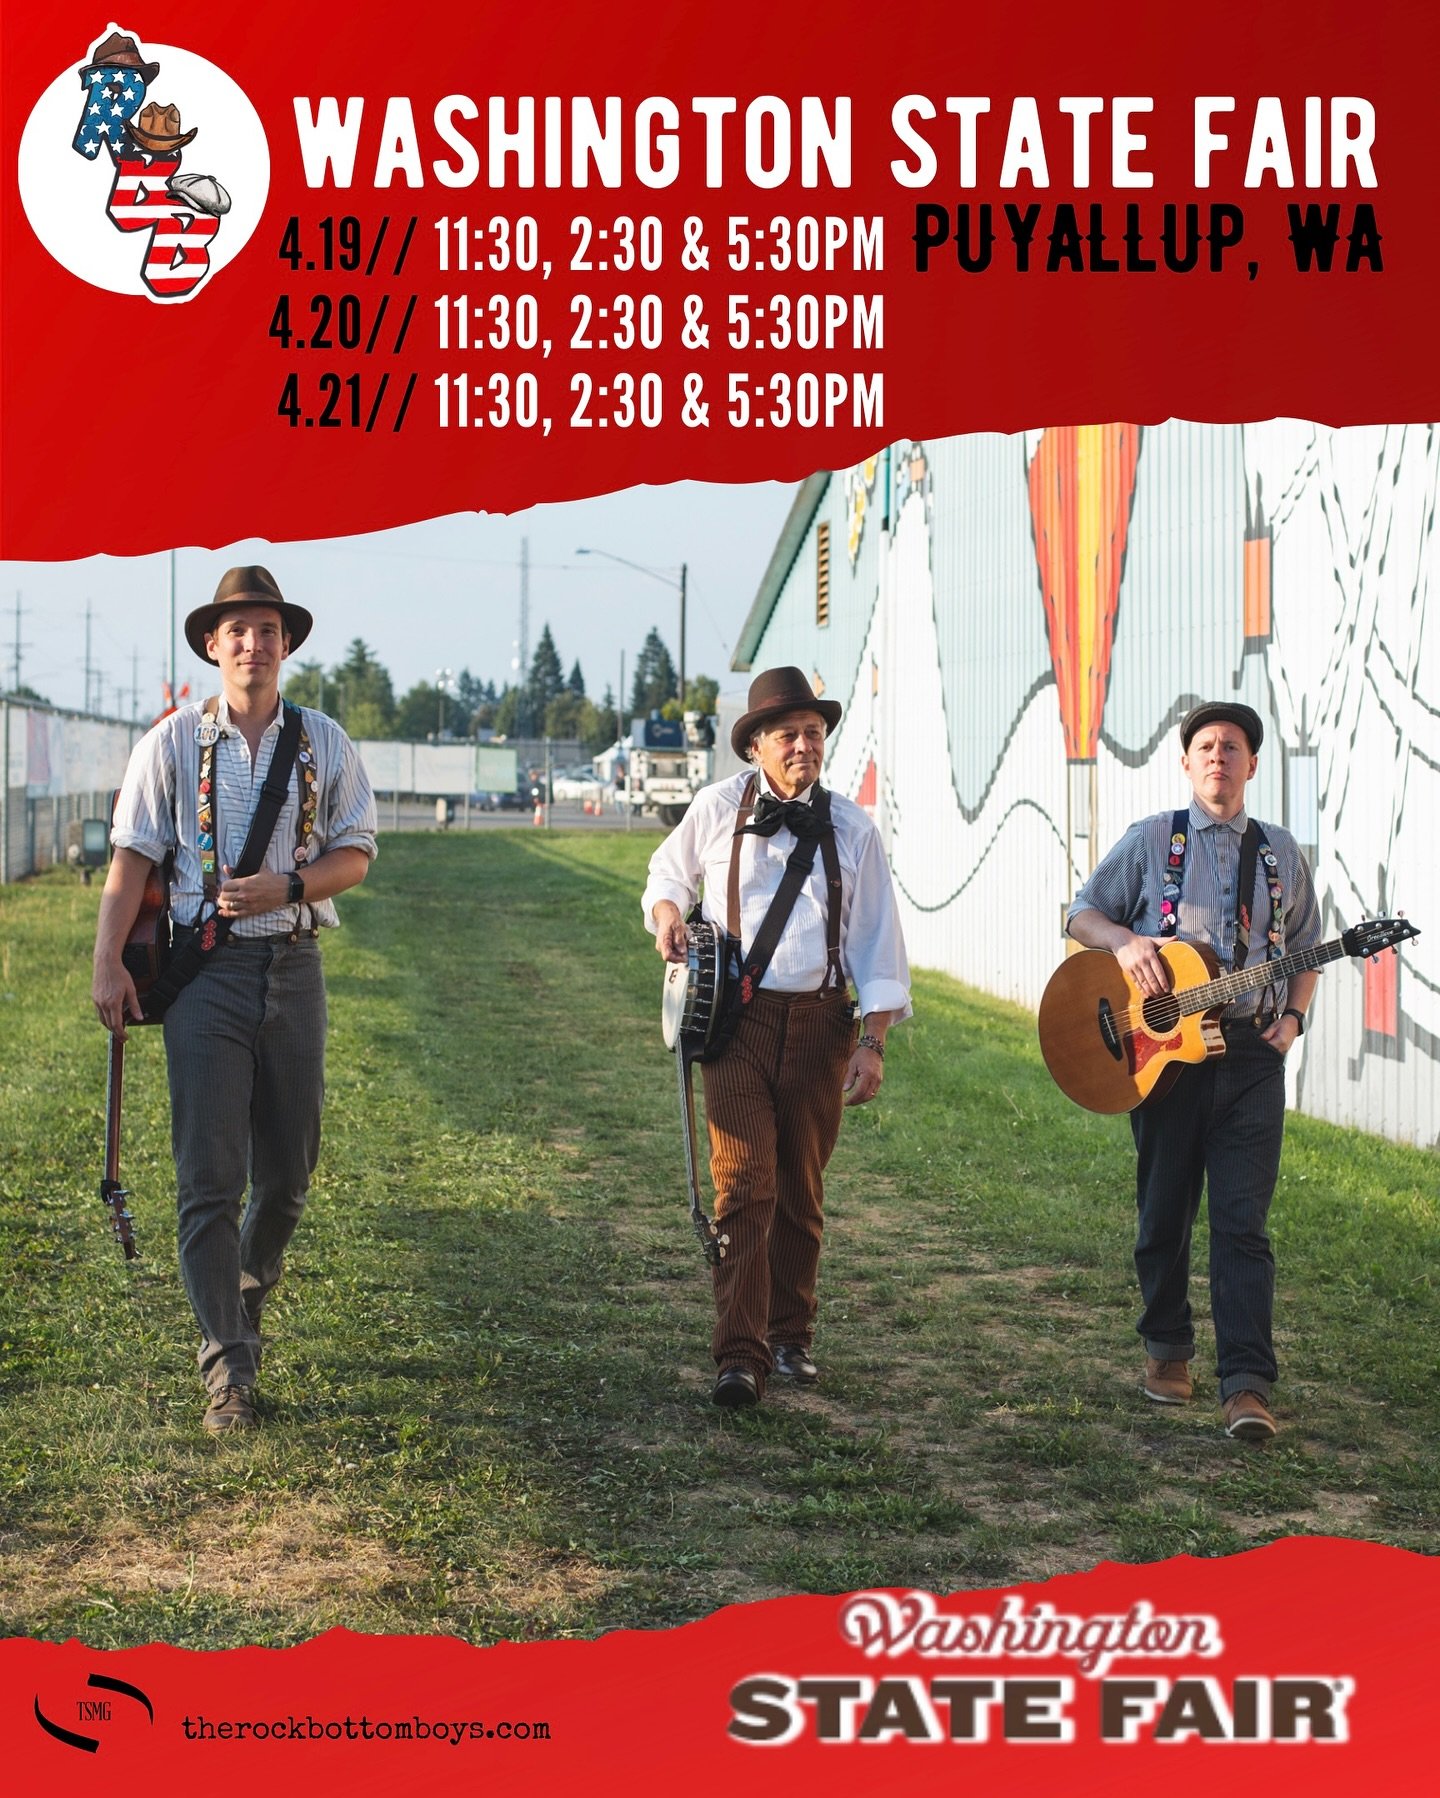 Pulling up to Puyallup tomorrow! 😎 
See you soon @wastatefair !